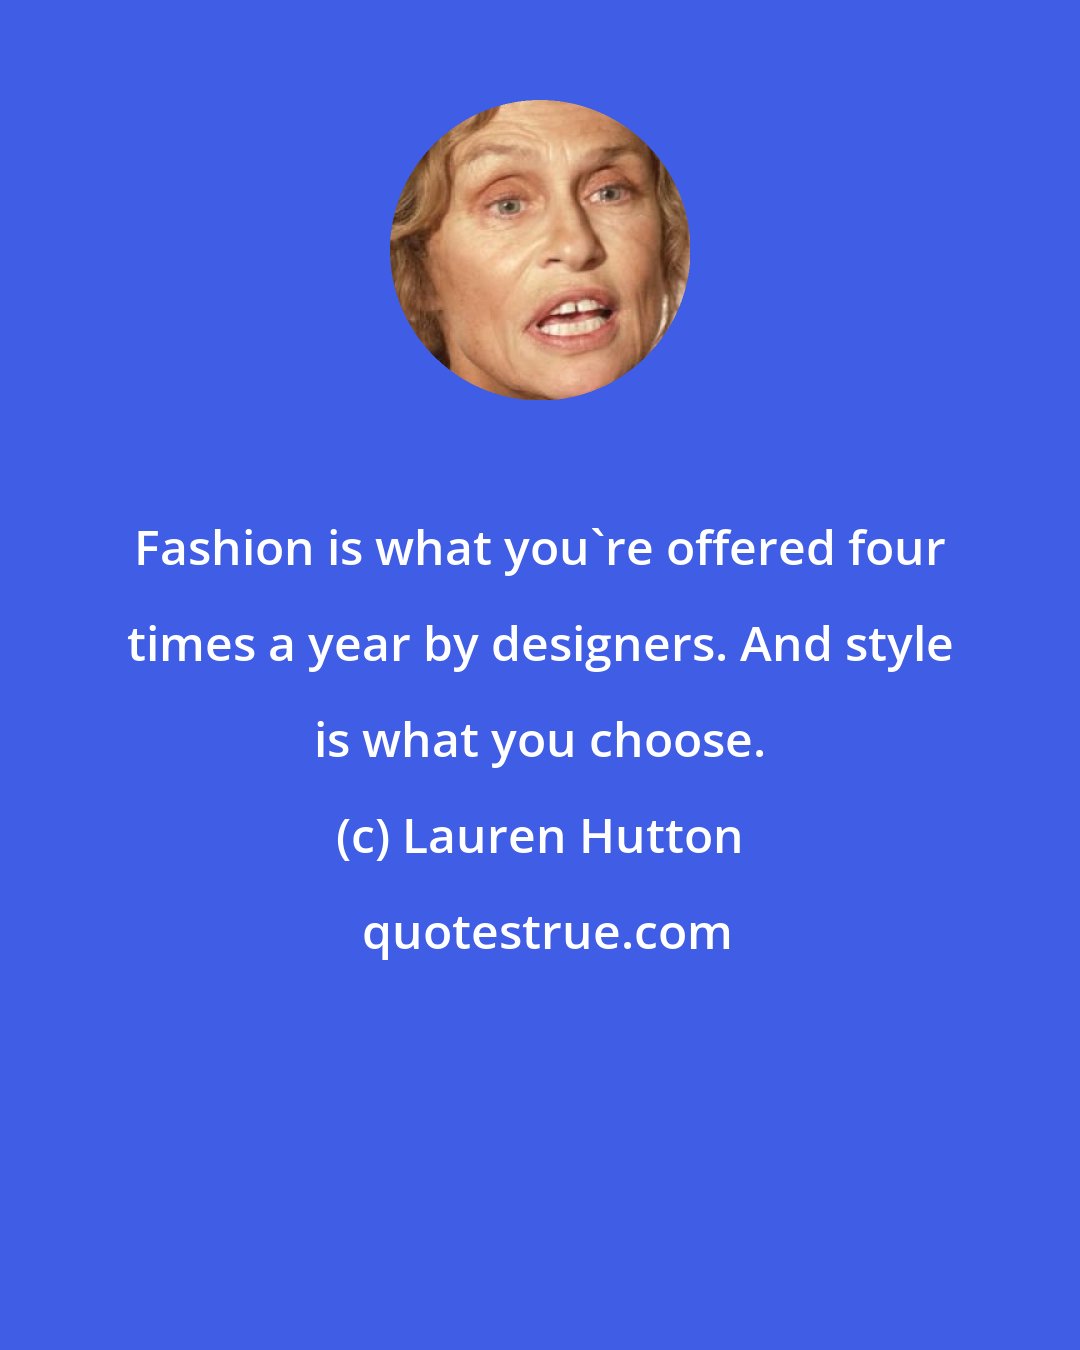 Lauren Hutton: Fashion is what you're offered four times a year by designers. And style is what you choose.